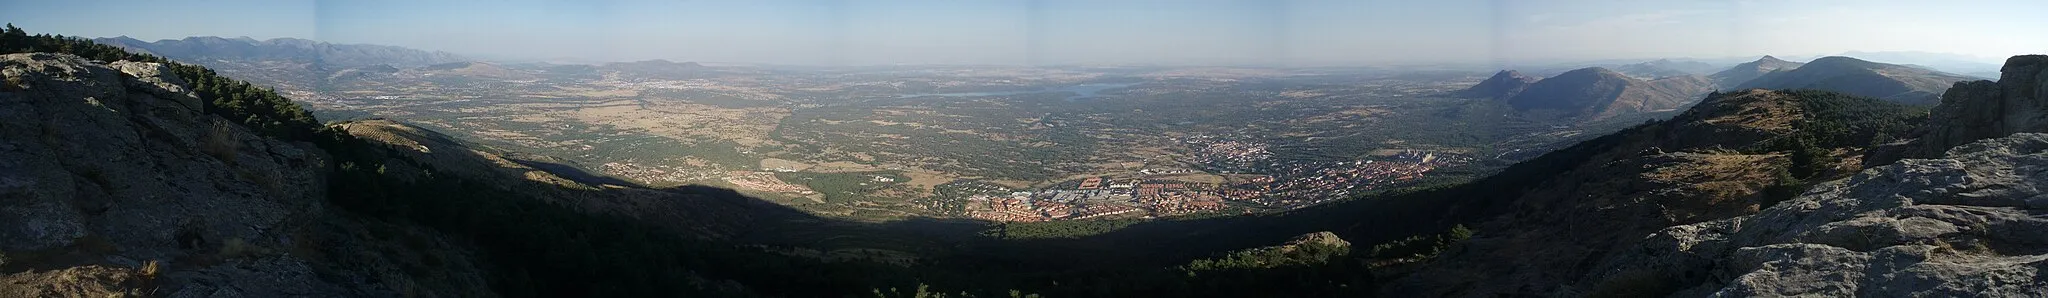 Photo showing: Views from the summit of Abantos (Sierra de Guadarrama, central Spain).